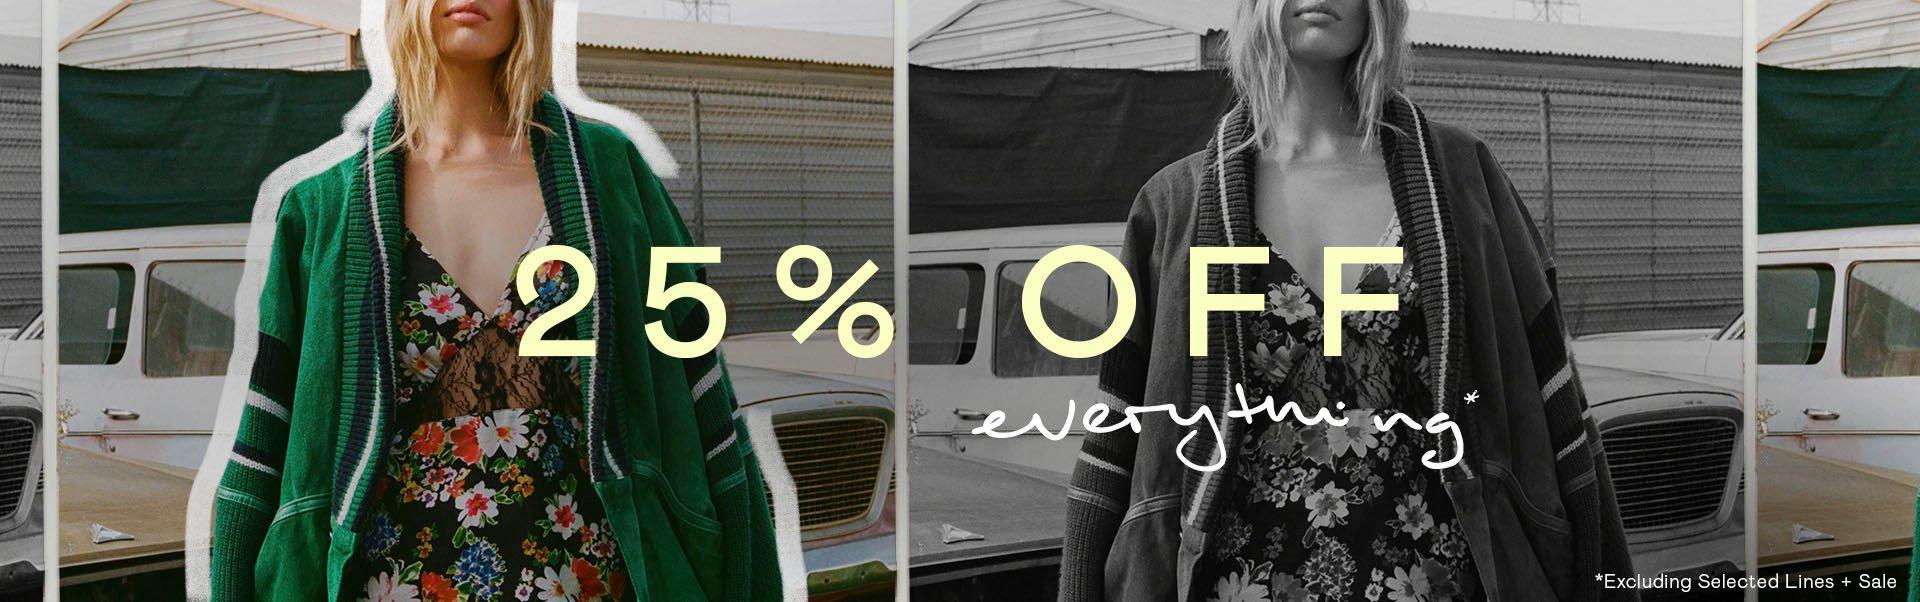 25% OFF Everything!*